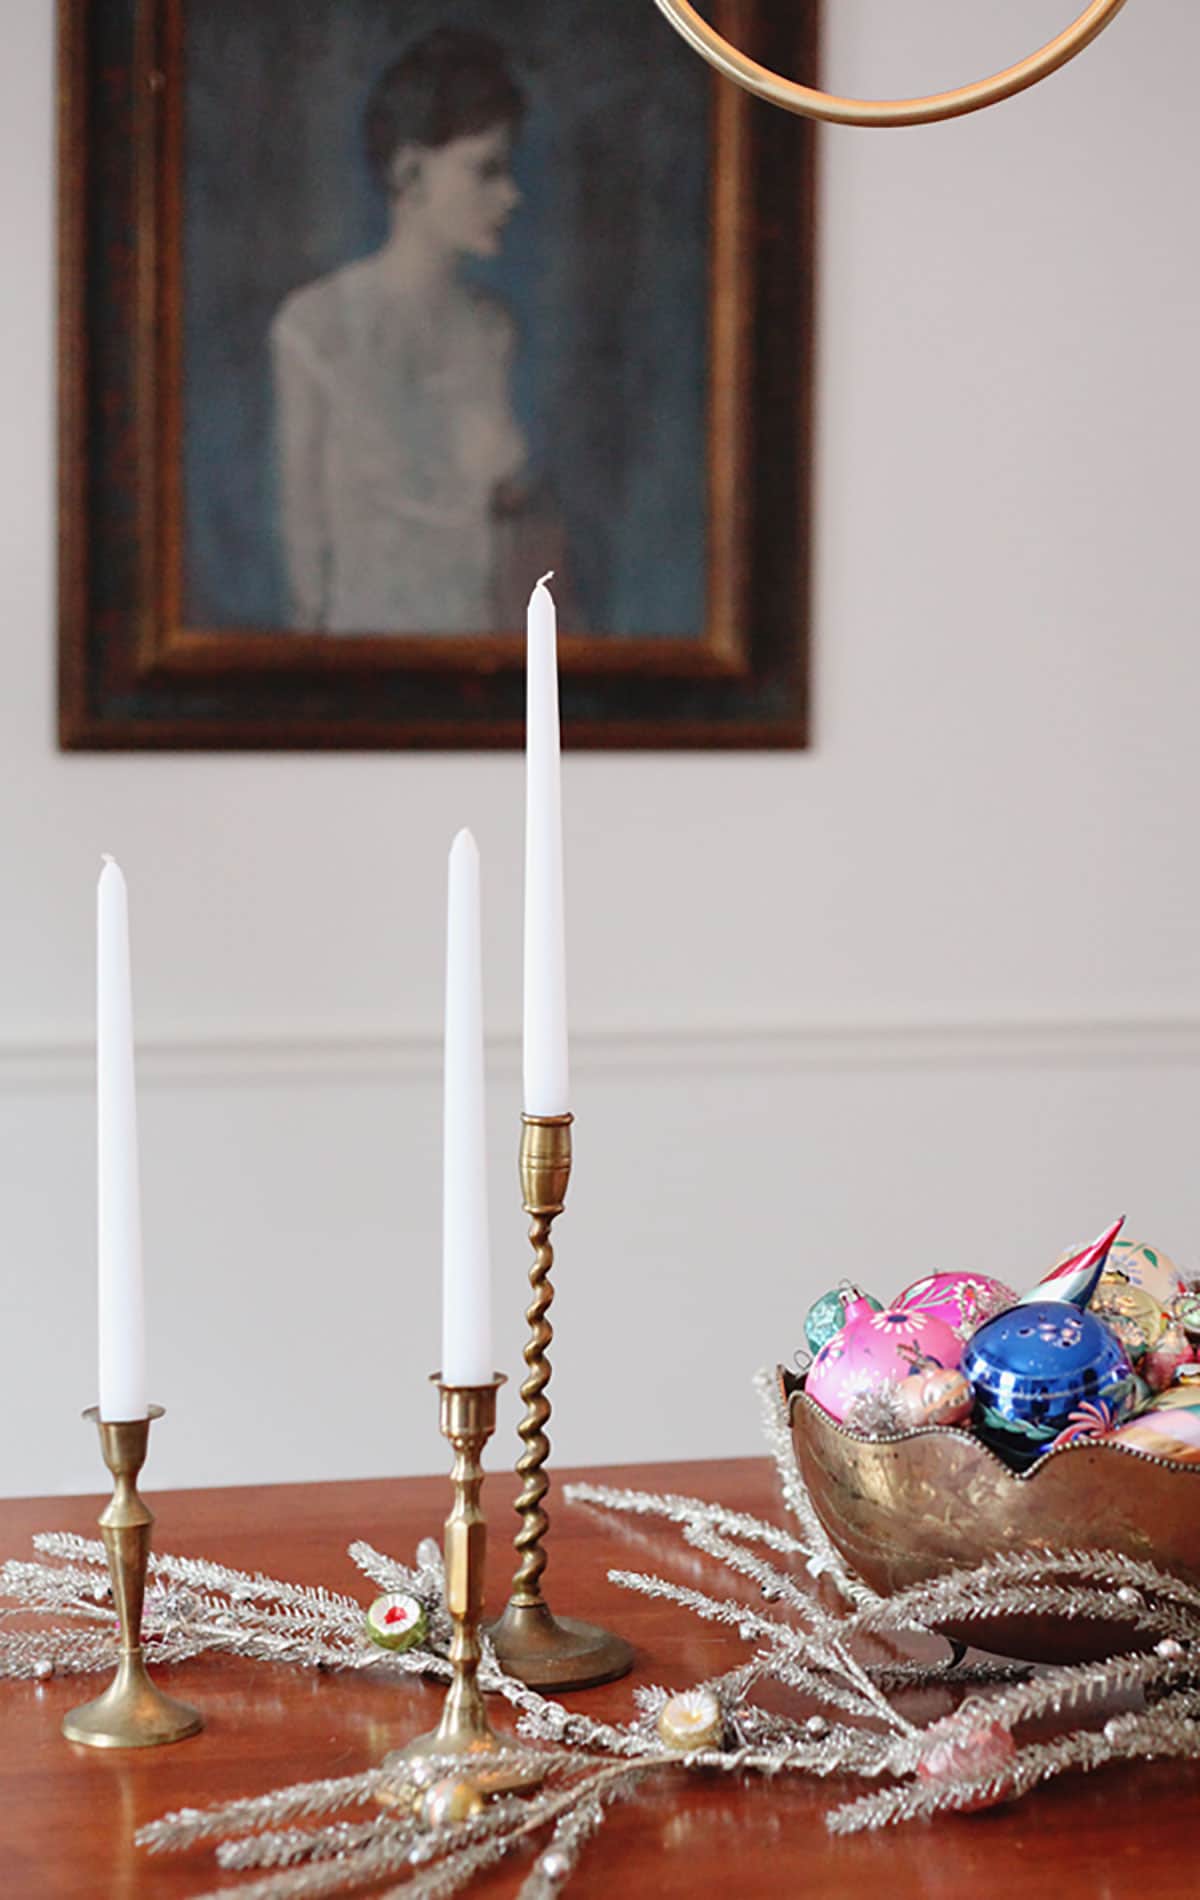 blogger holiday home tour - dining room decor with vintage ornaments